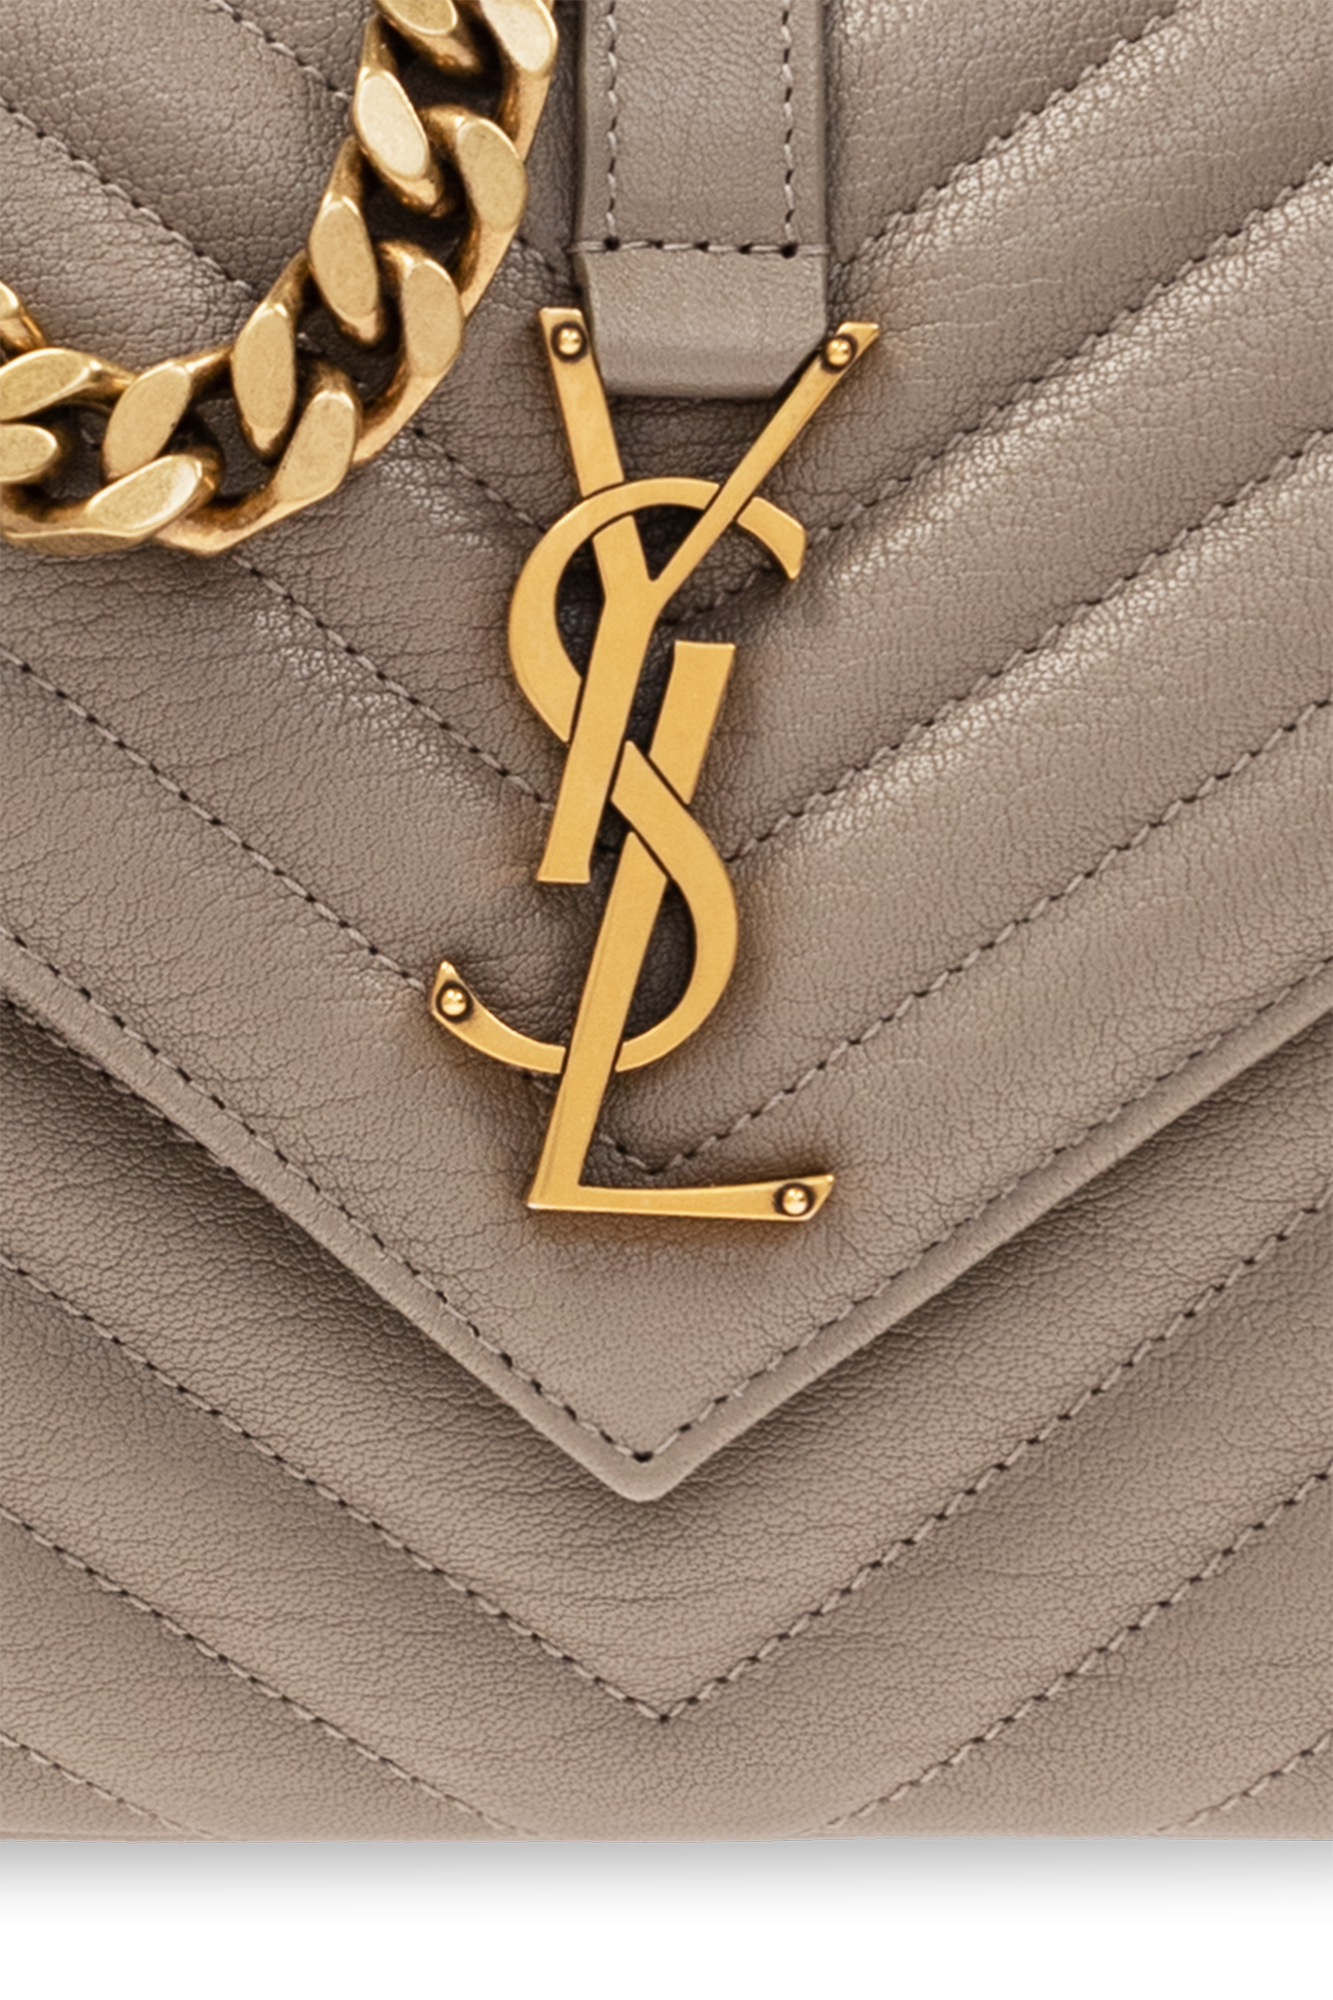 YSL - Saint Laurent Purse -LOULOU MEDIUM CHAIN BAG IN QUILTED "Y"  LEATHER